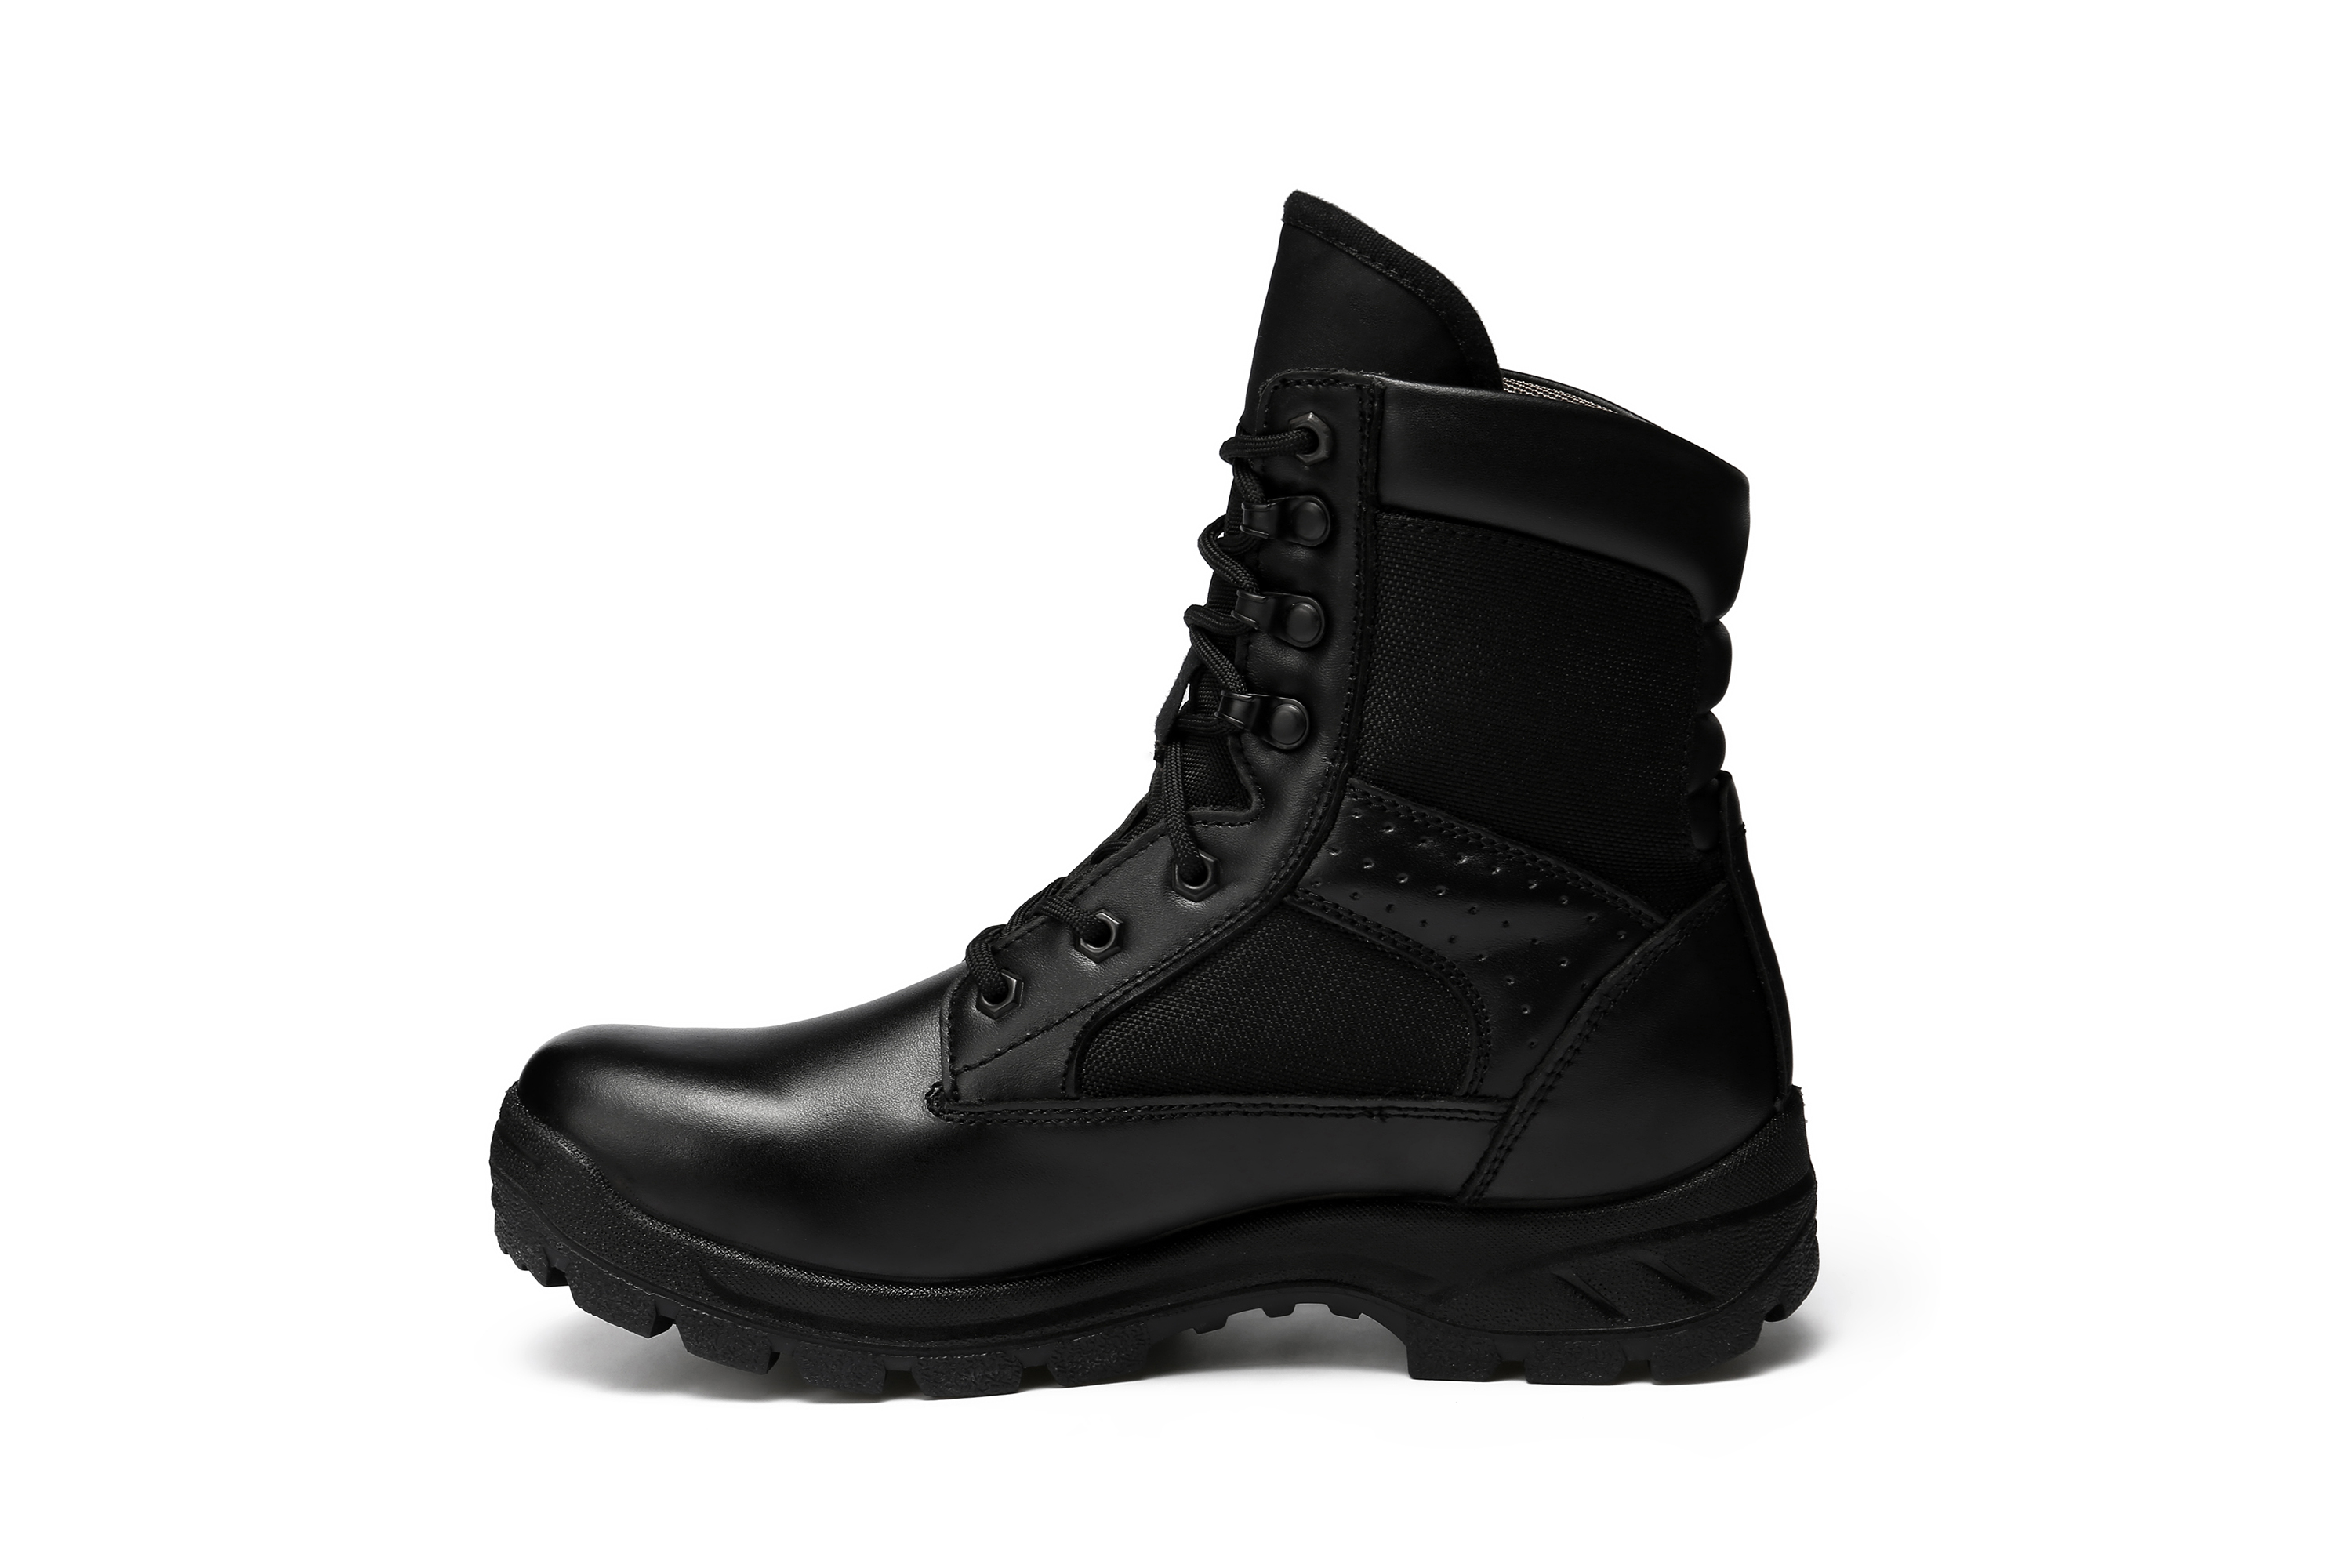 Black Military Tactical Boots 